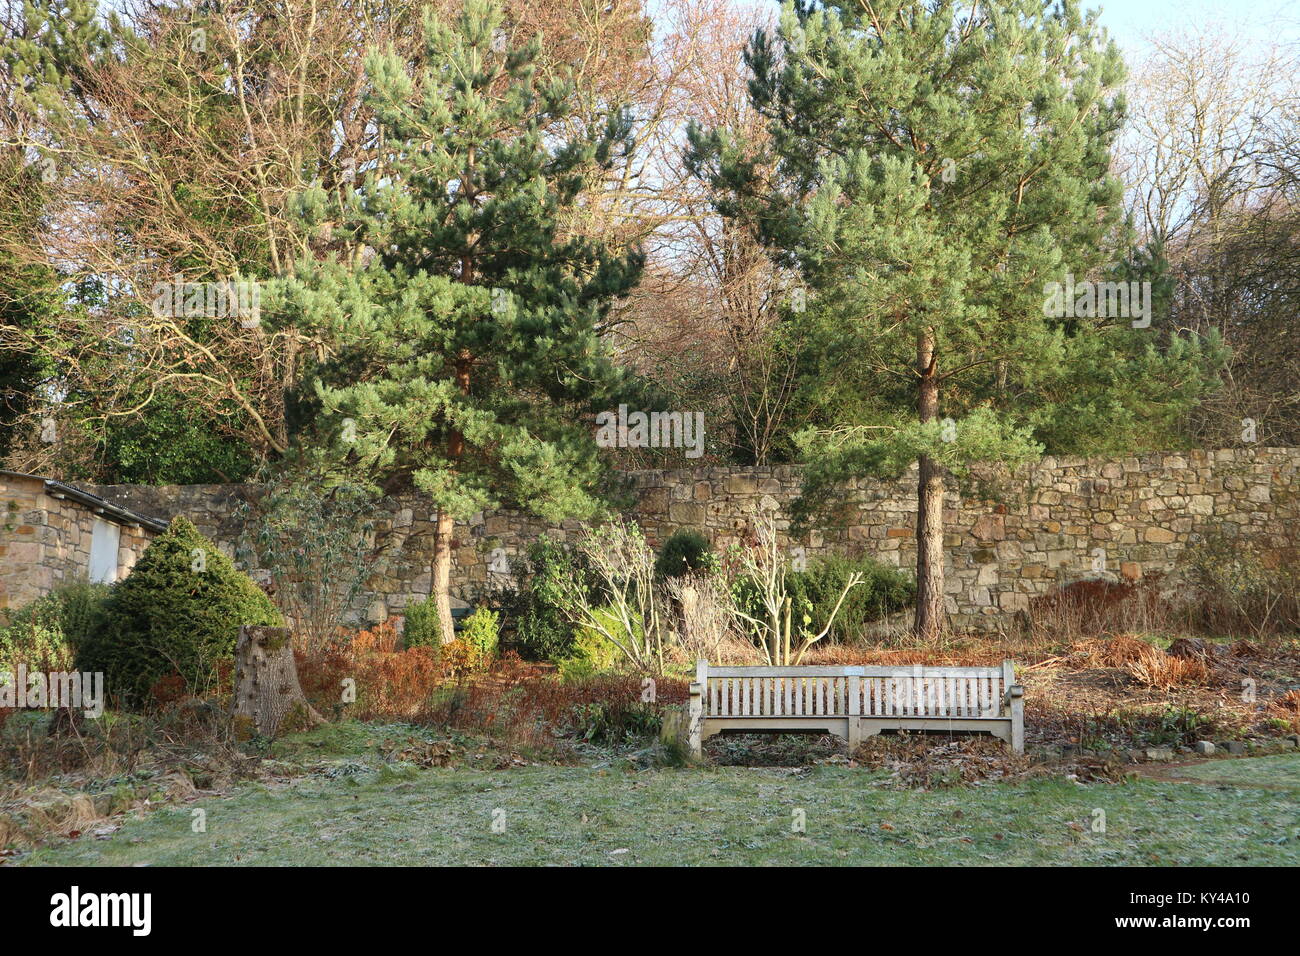 A wooden bench in the Walled Garden of the Public Park of Corstorphine. The shot was taken in January 2018 Stock Photo